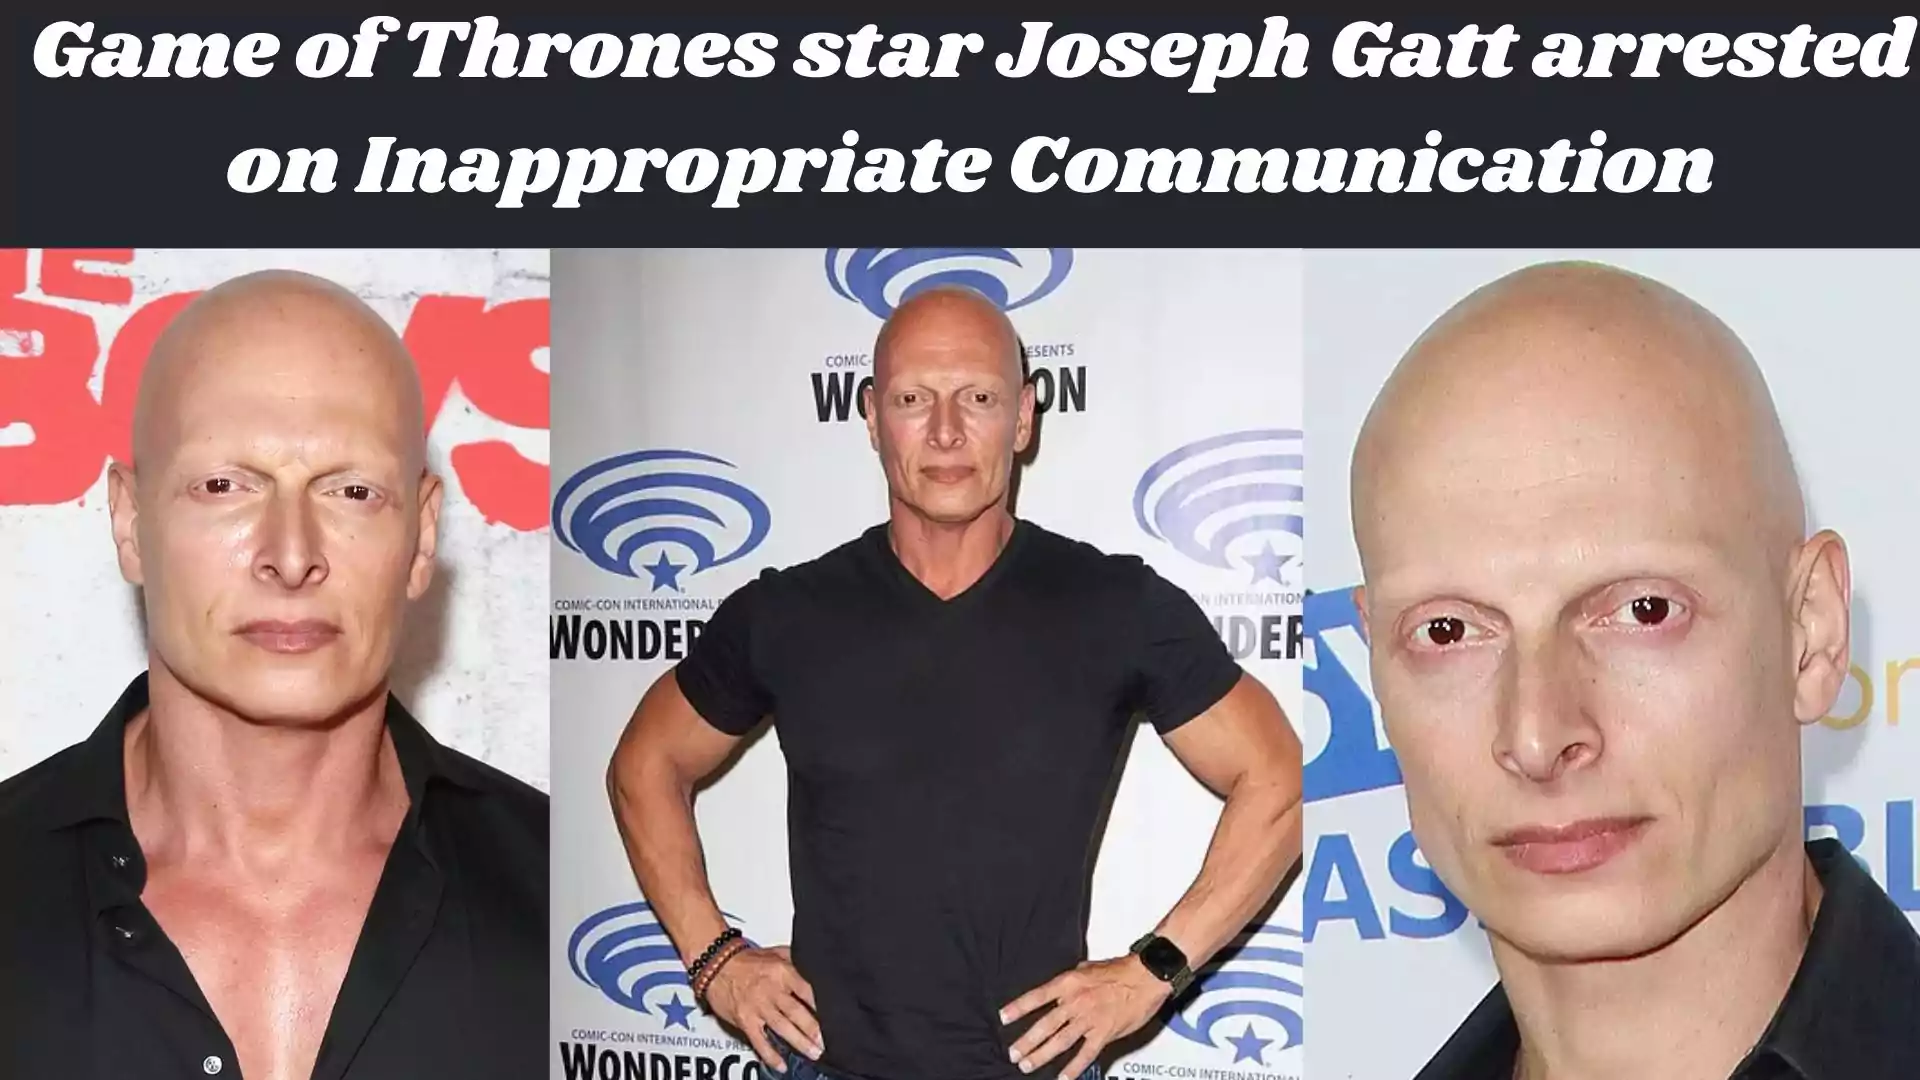 Game of Thrones star Joseph Gatt arrested for Inappropriate Communication wallpaper and images